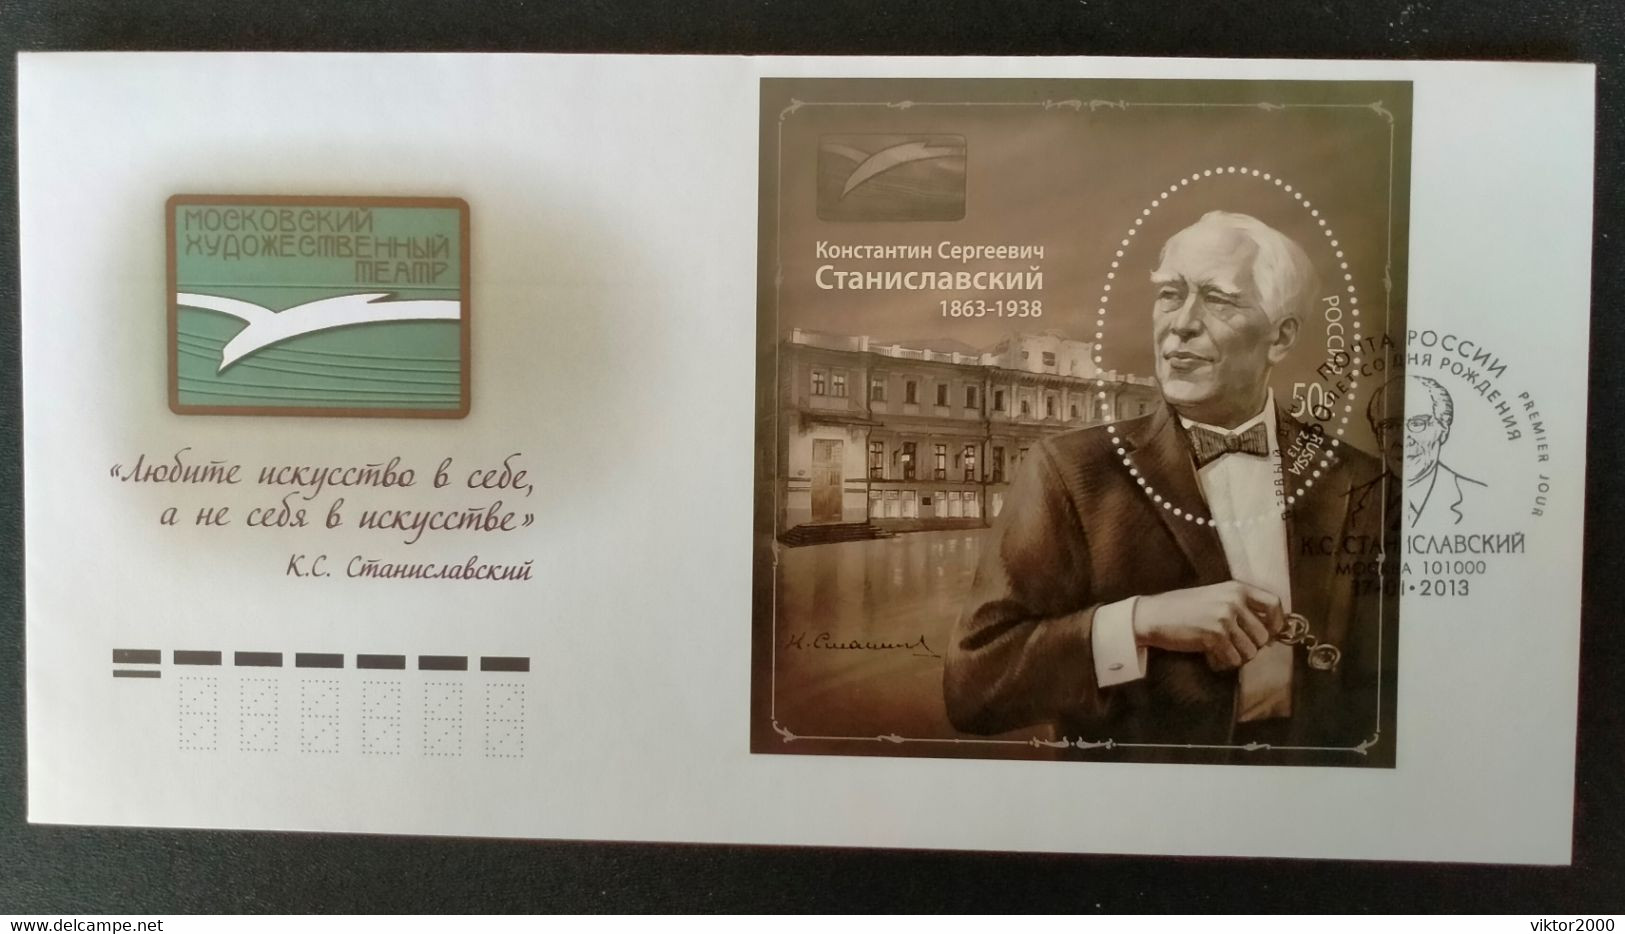 RUSSIA FDC 2013 The 150th Anniversary Of The Birth Of K.S. Stanislavsky, 1863-1938 - FDC